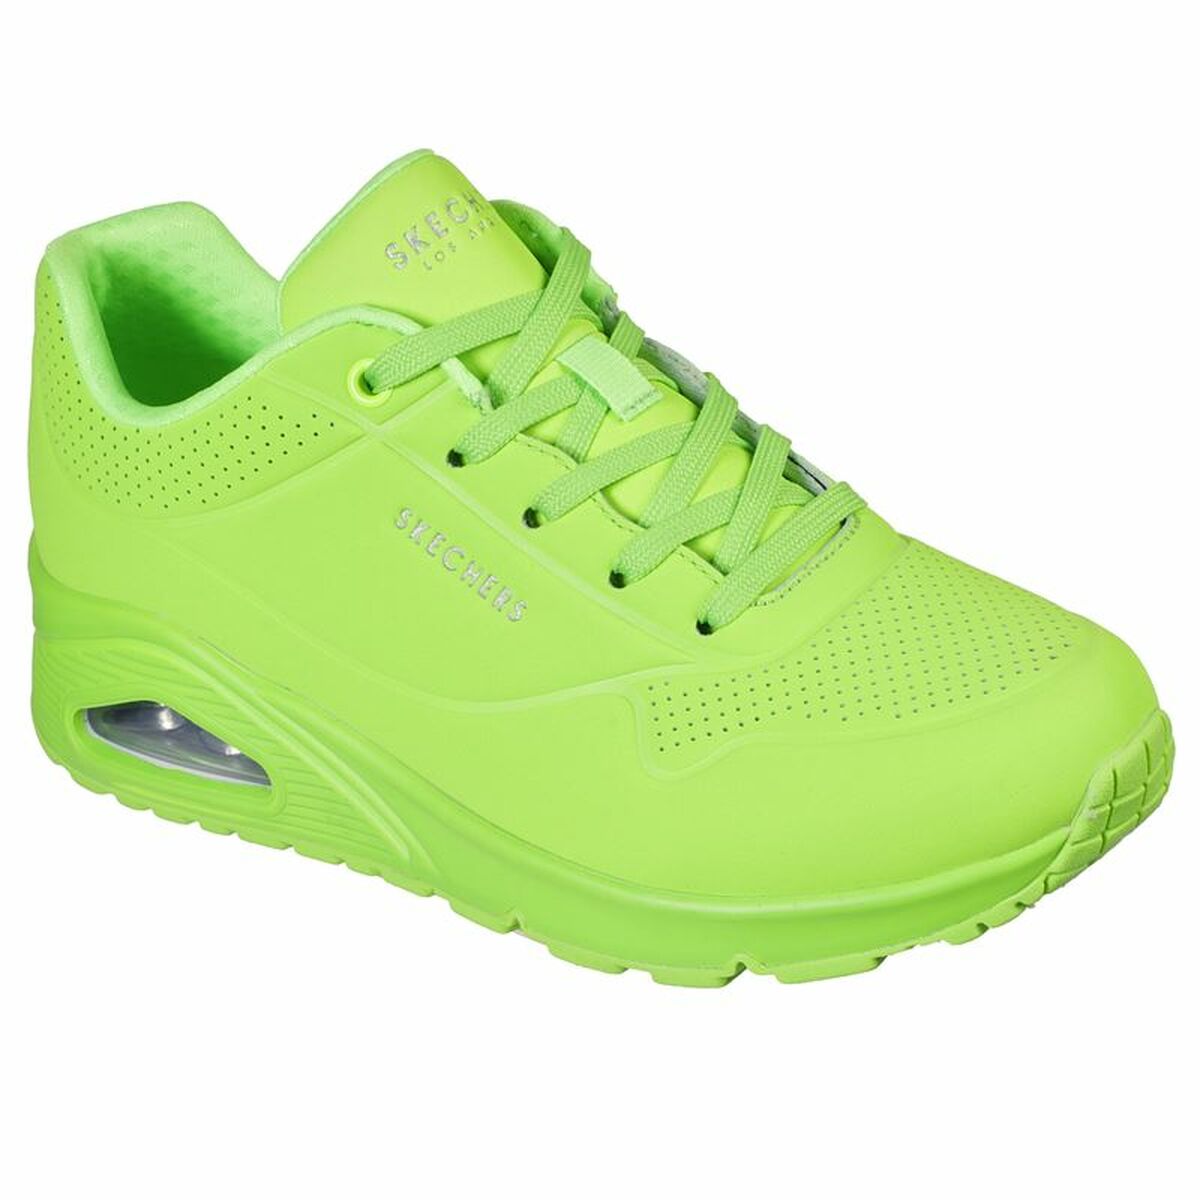 Sports Trainers for Women Skechers Uno - Night Shades Lime